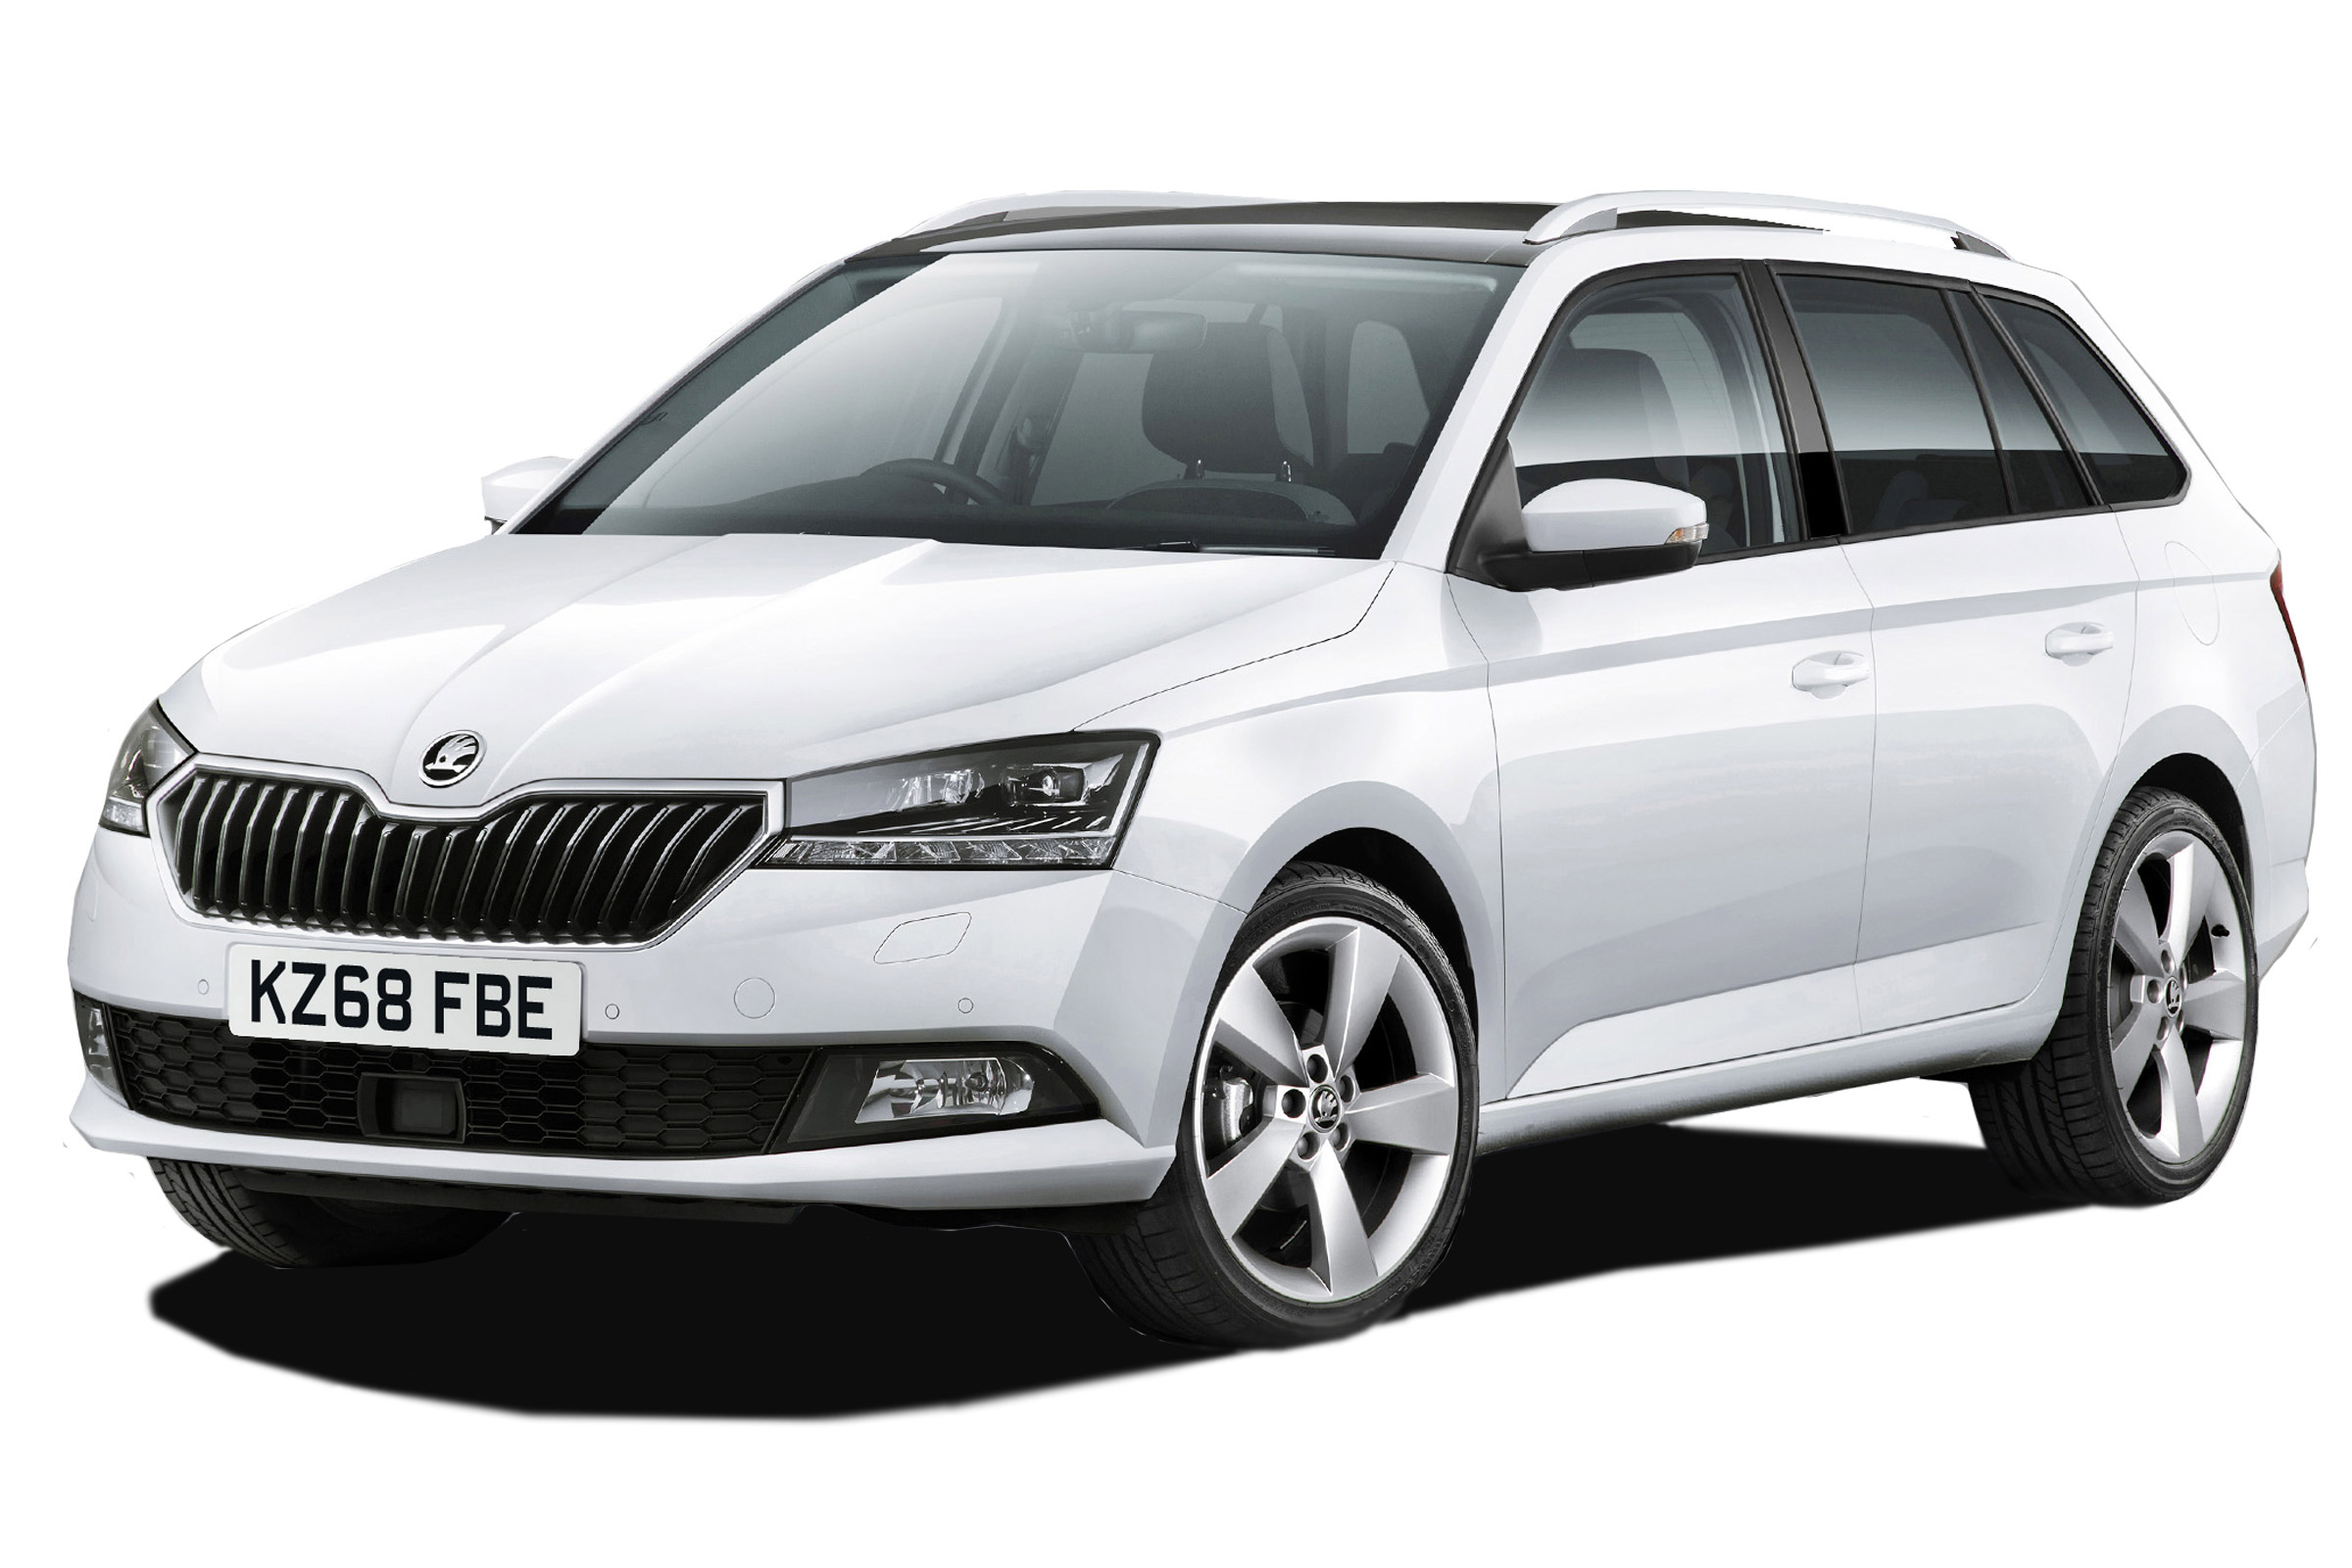 Skoda Roomster MPV review - CarBuyer 